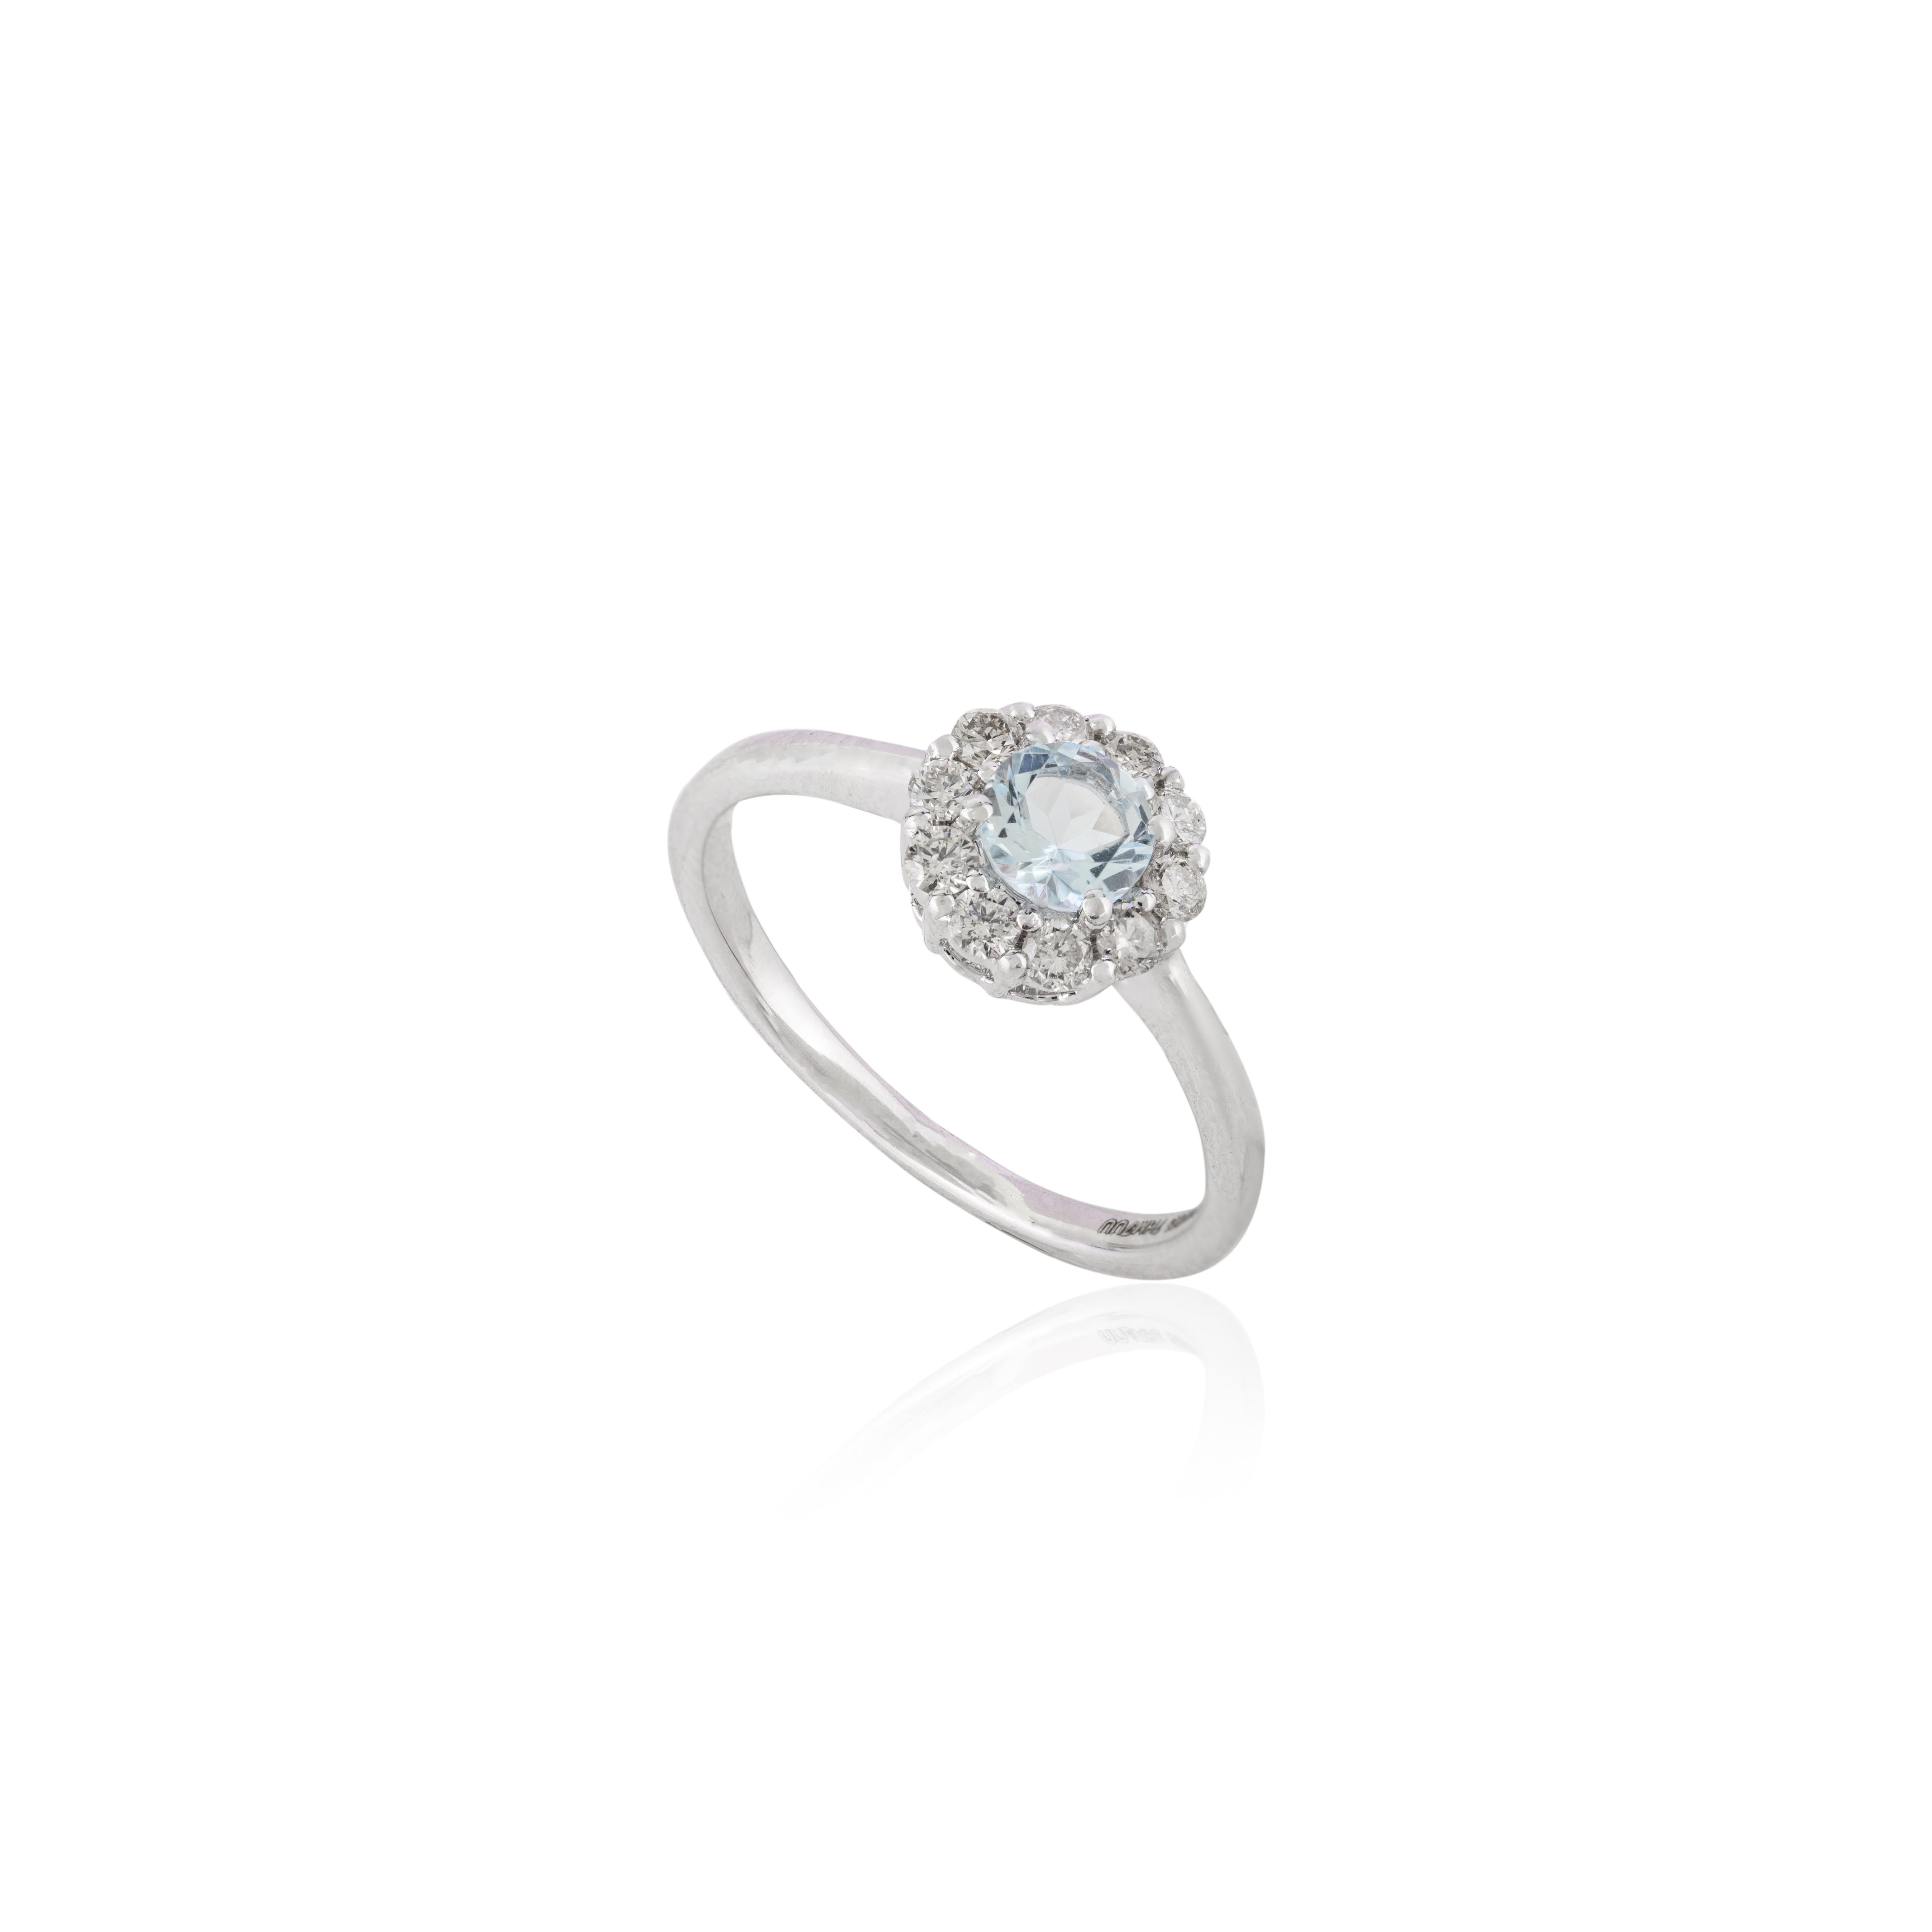 For Sale:  Dainty Aquamarine Halo Diamond Ring Gift for Girlfriend in 14k White Gold 5